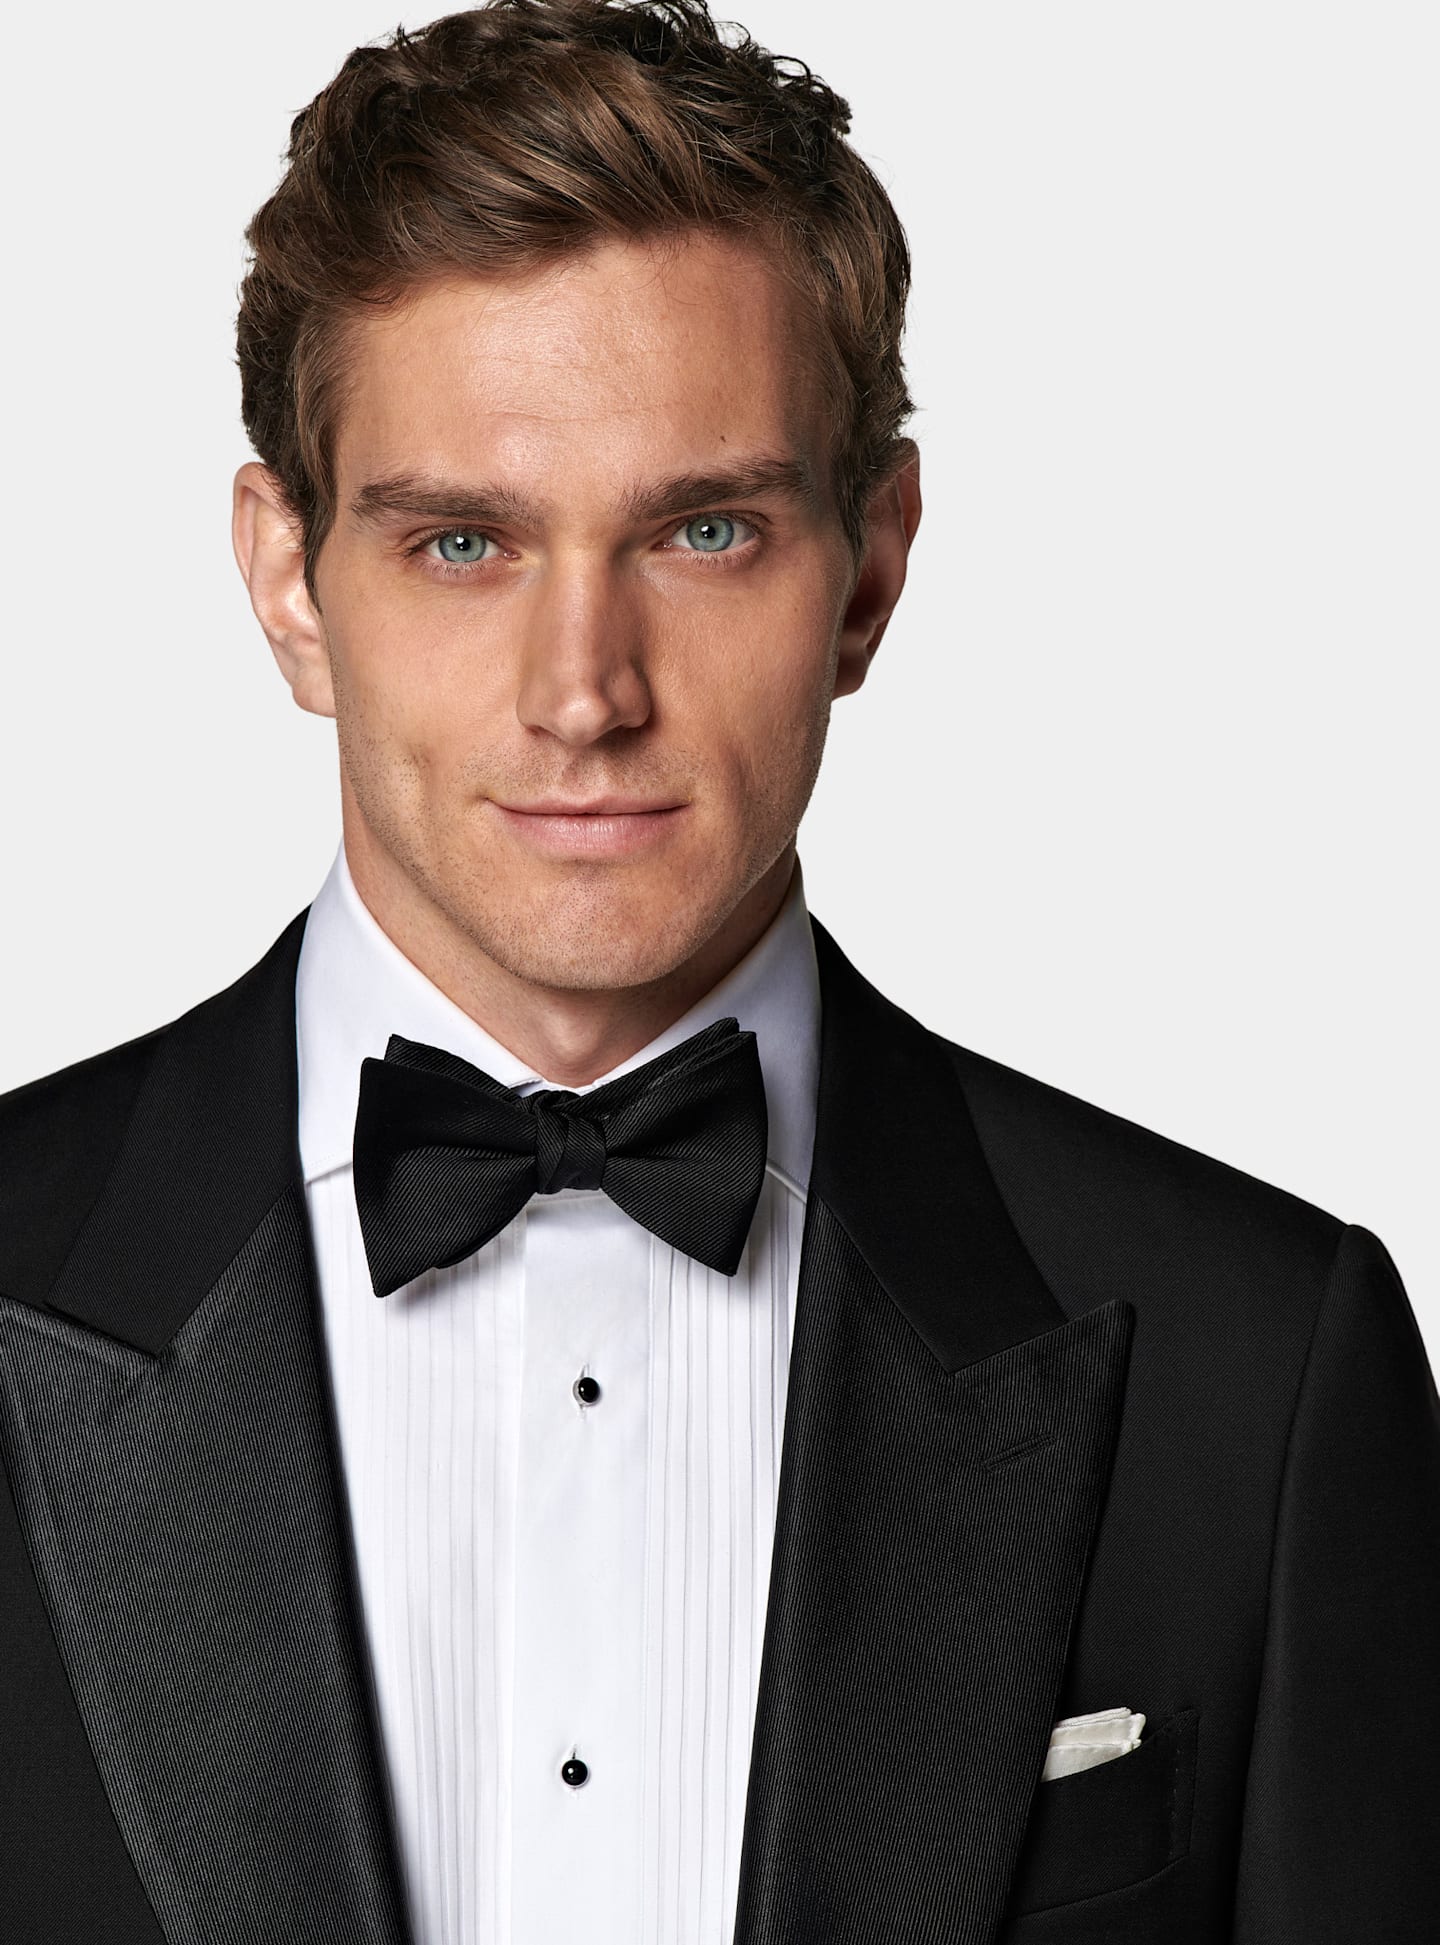 Tuxedo jacket with white pleated shirt and black bow tie.